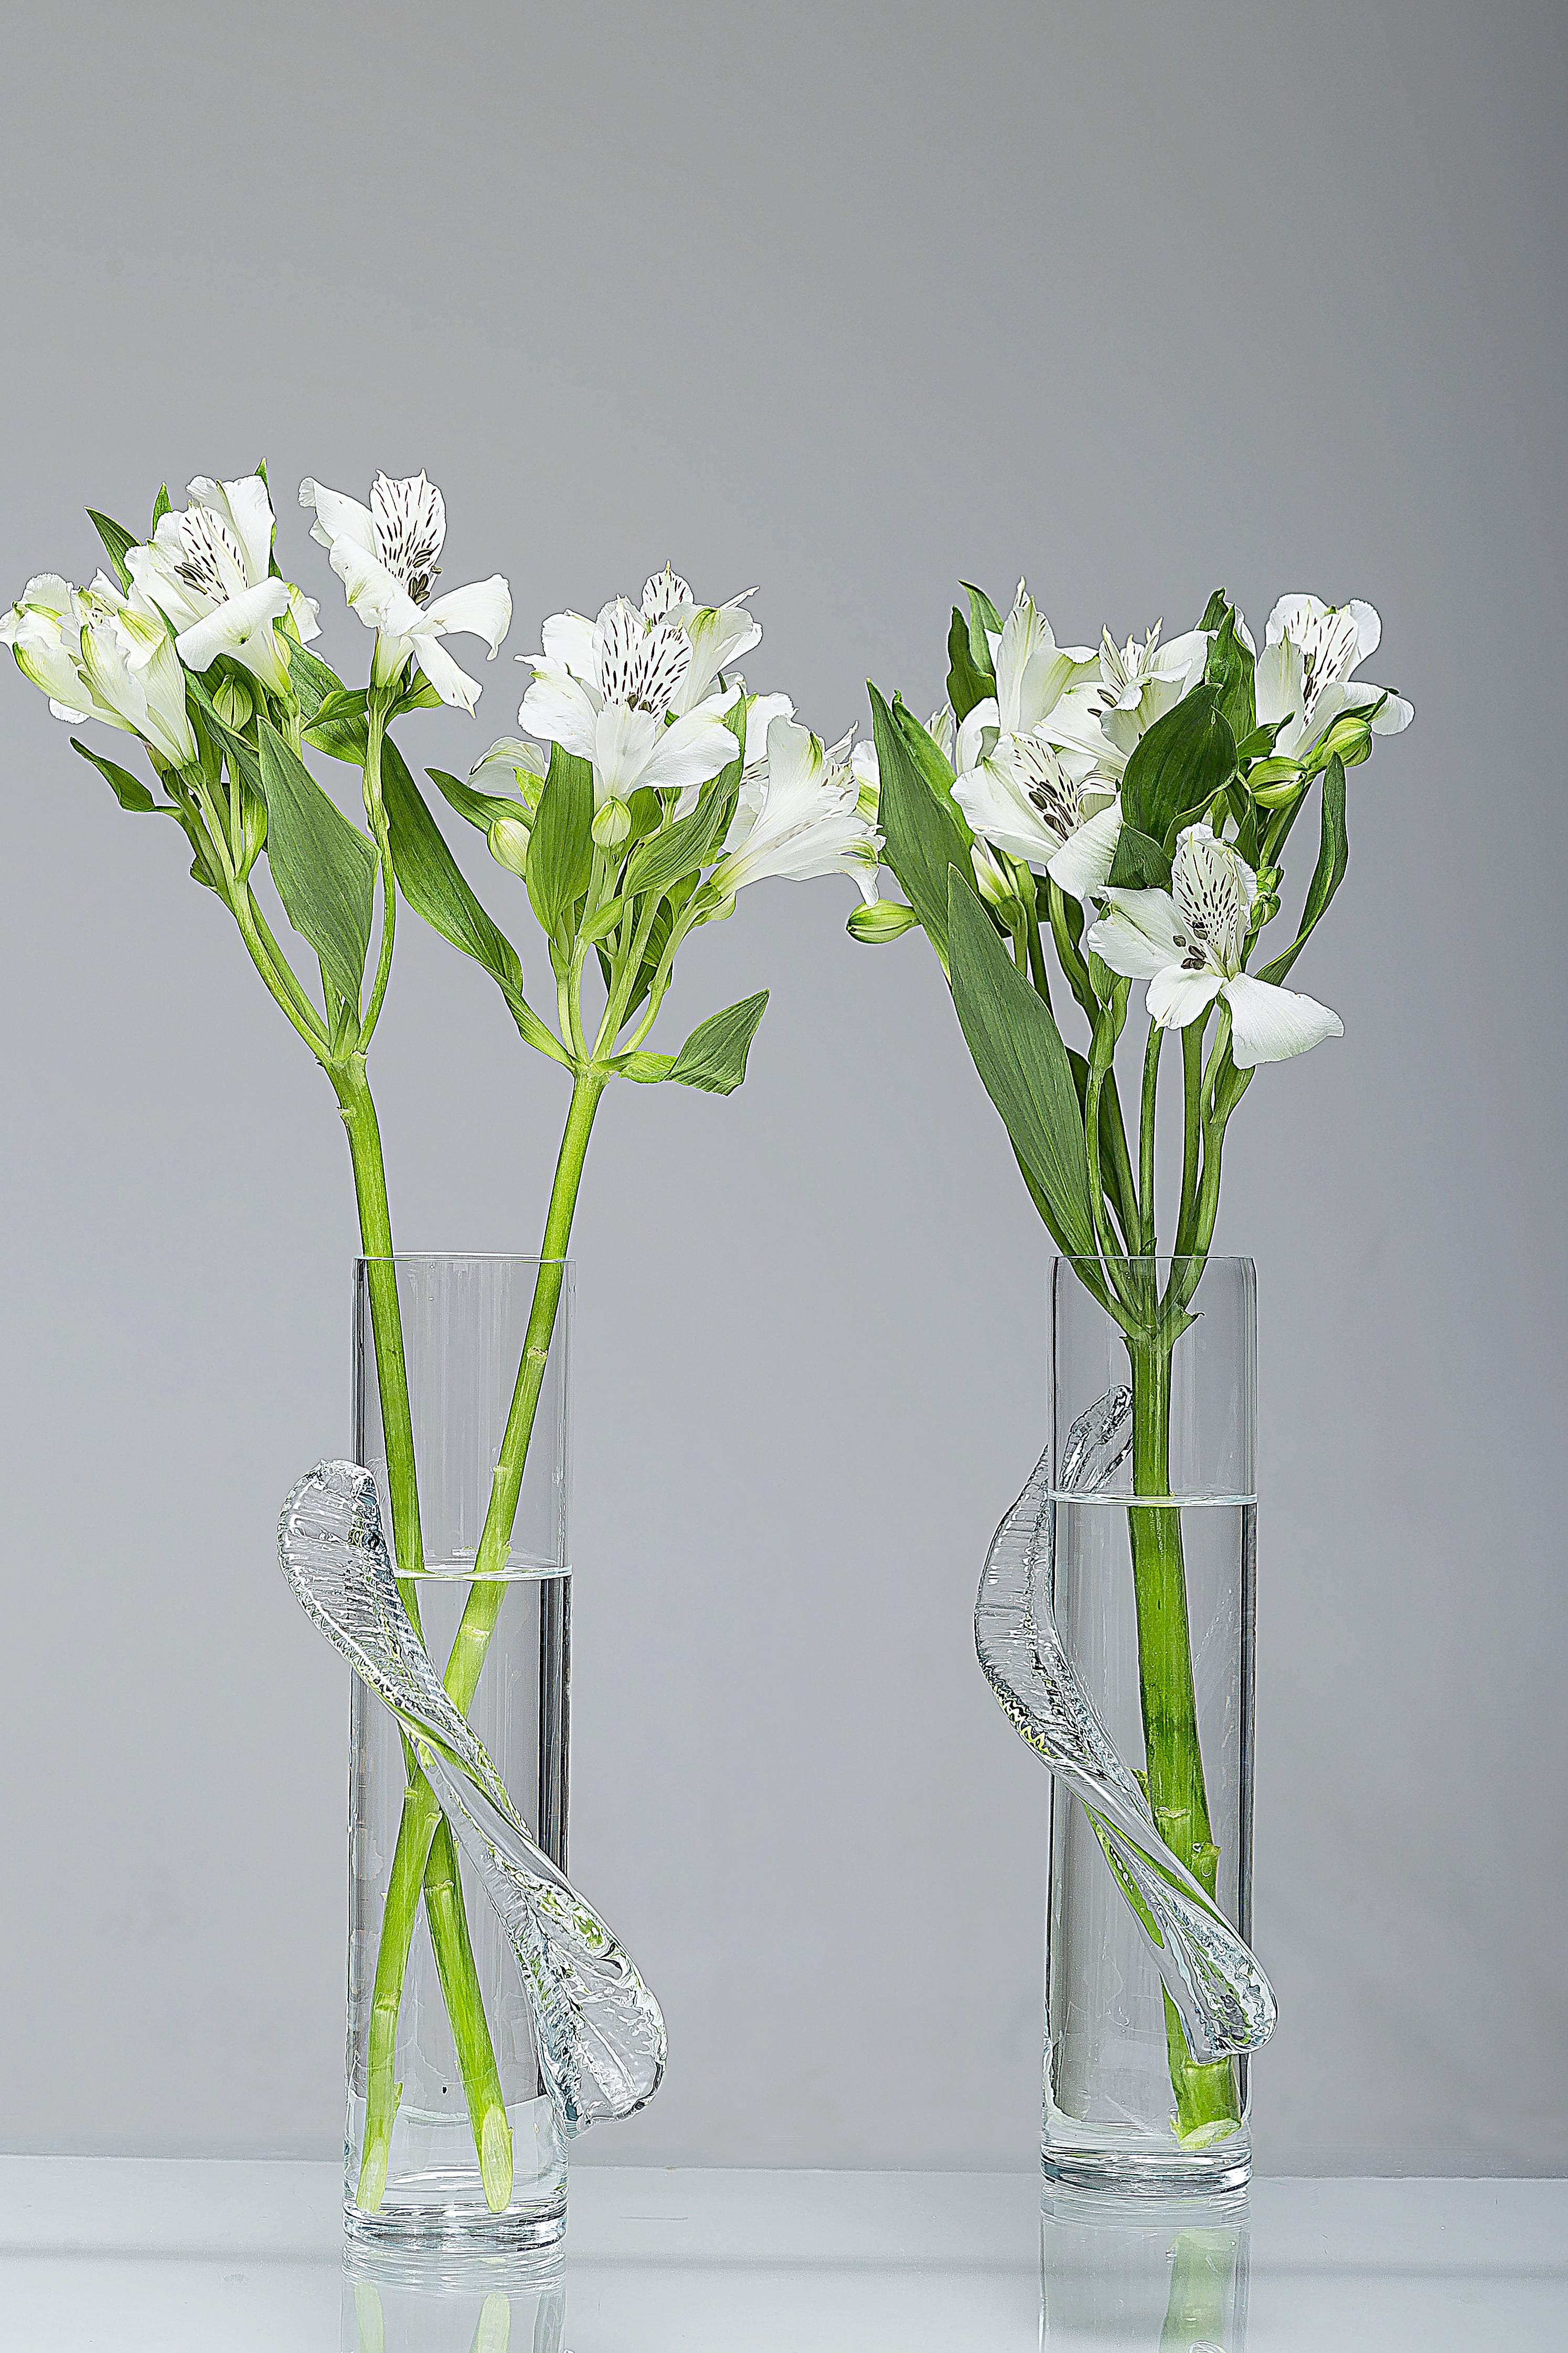 Named the 'B.xo' this flower vase was inspired in the 